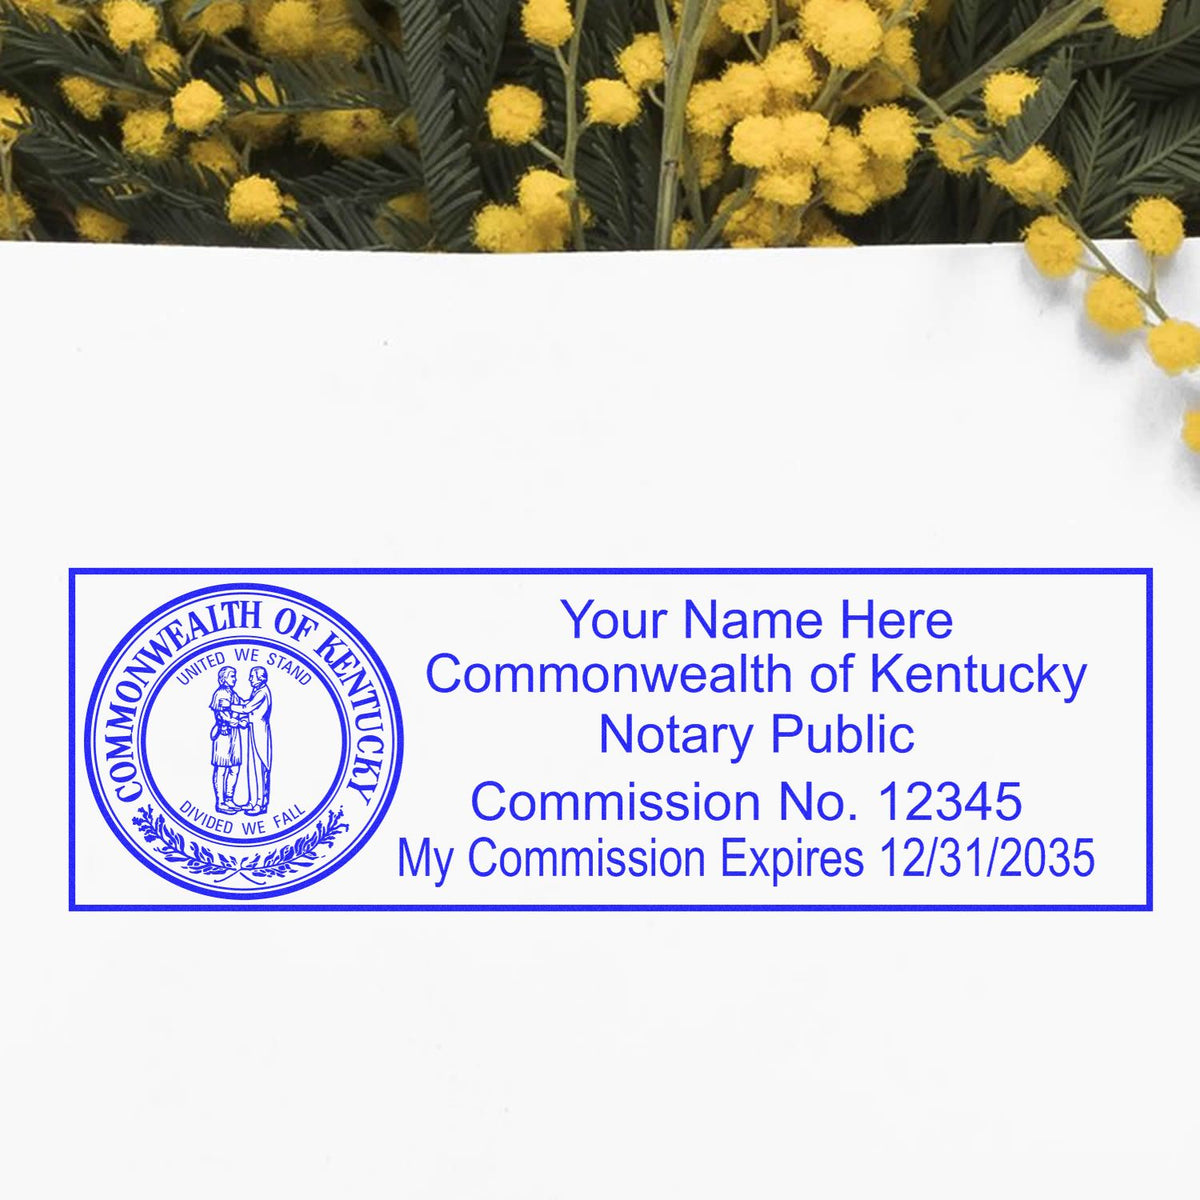 The PSI Kentucky Notary Stamp stamp impression comes to life with a crisp, detailed photo on paper - showcasing true professional quality.